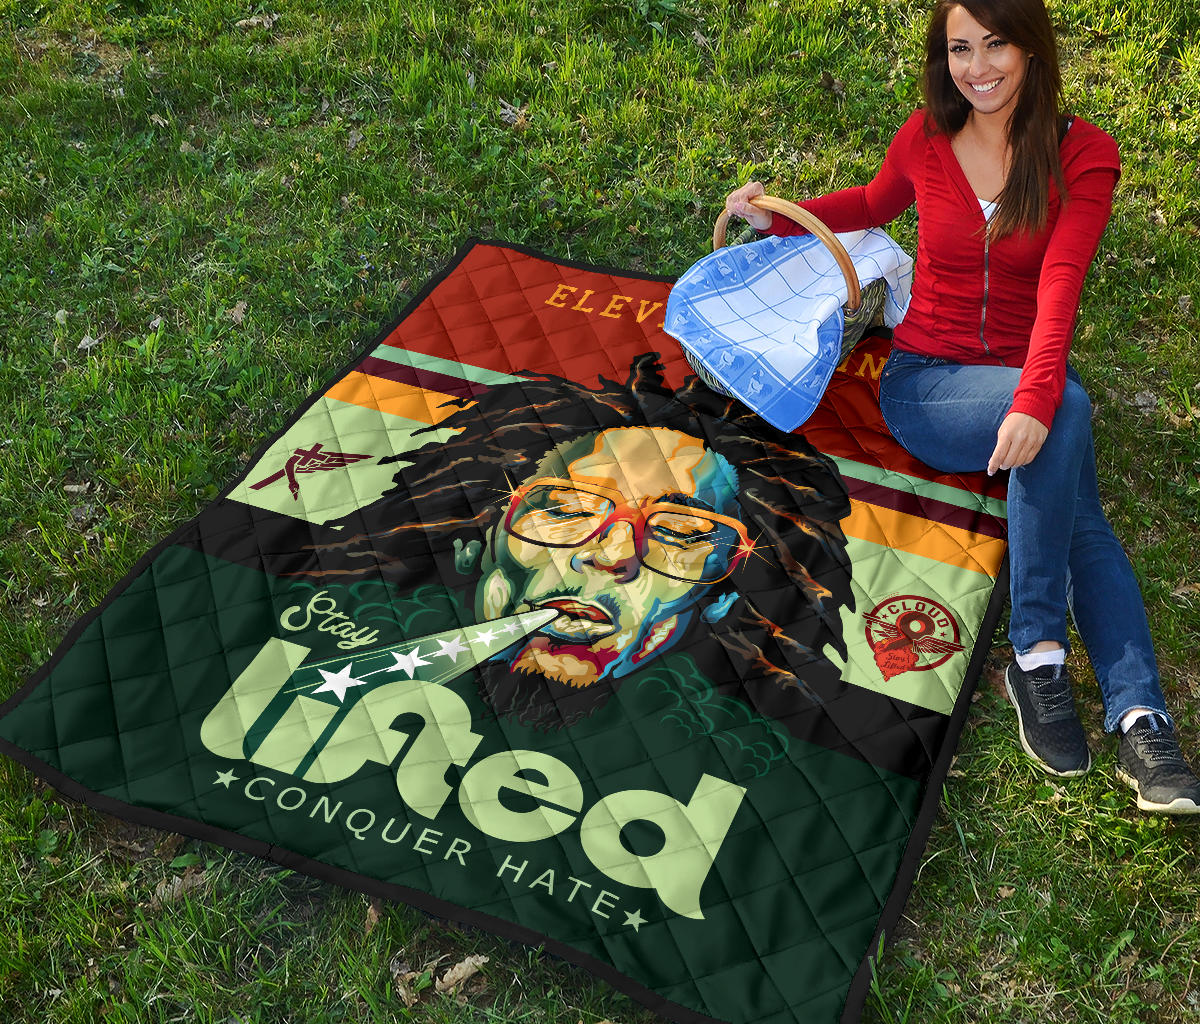 "Elevated Minds" Limited Edition Quilt